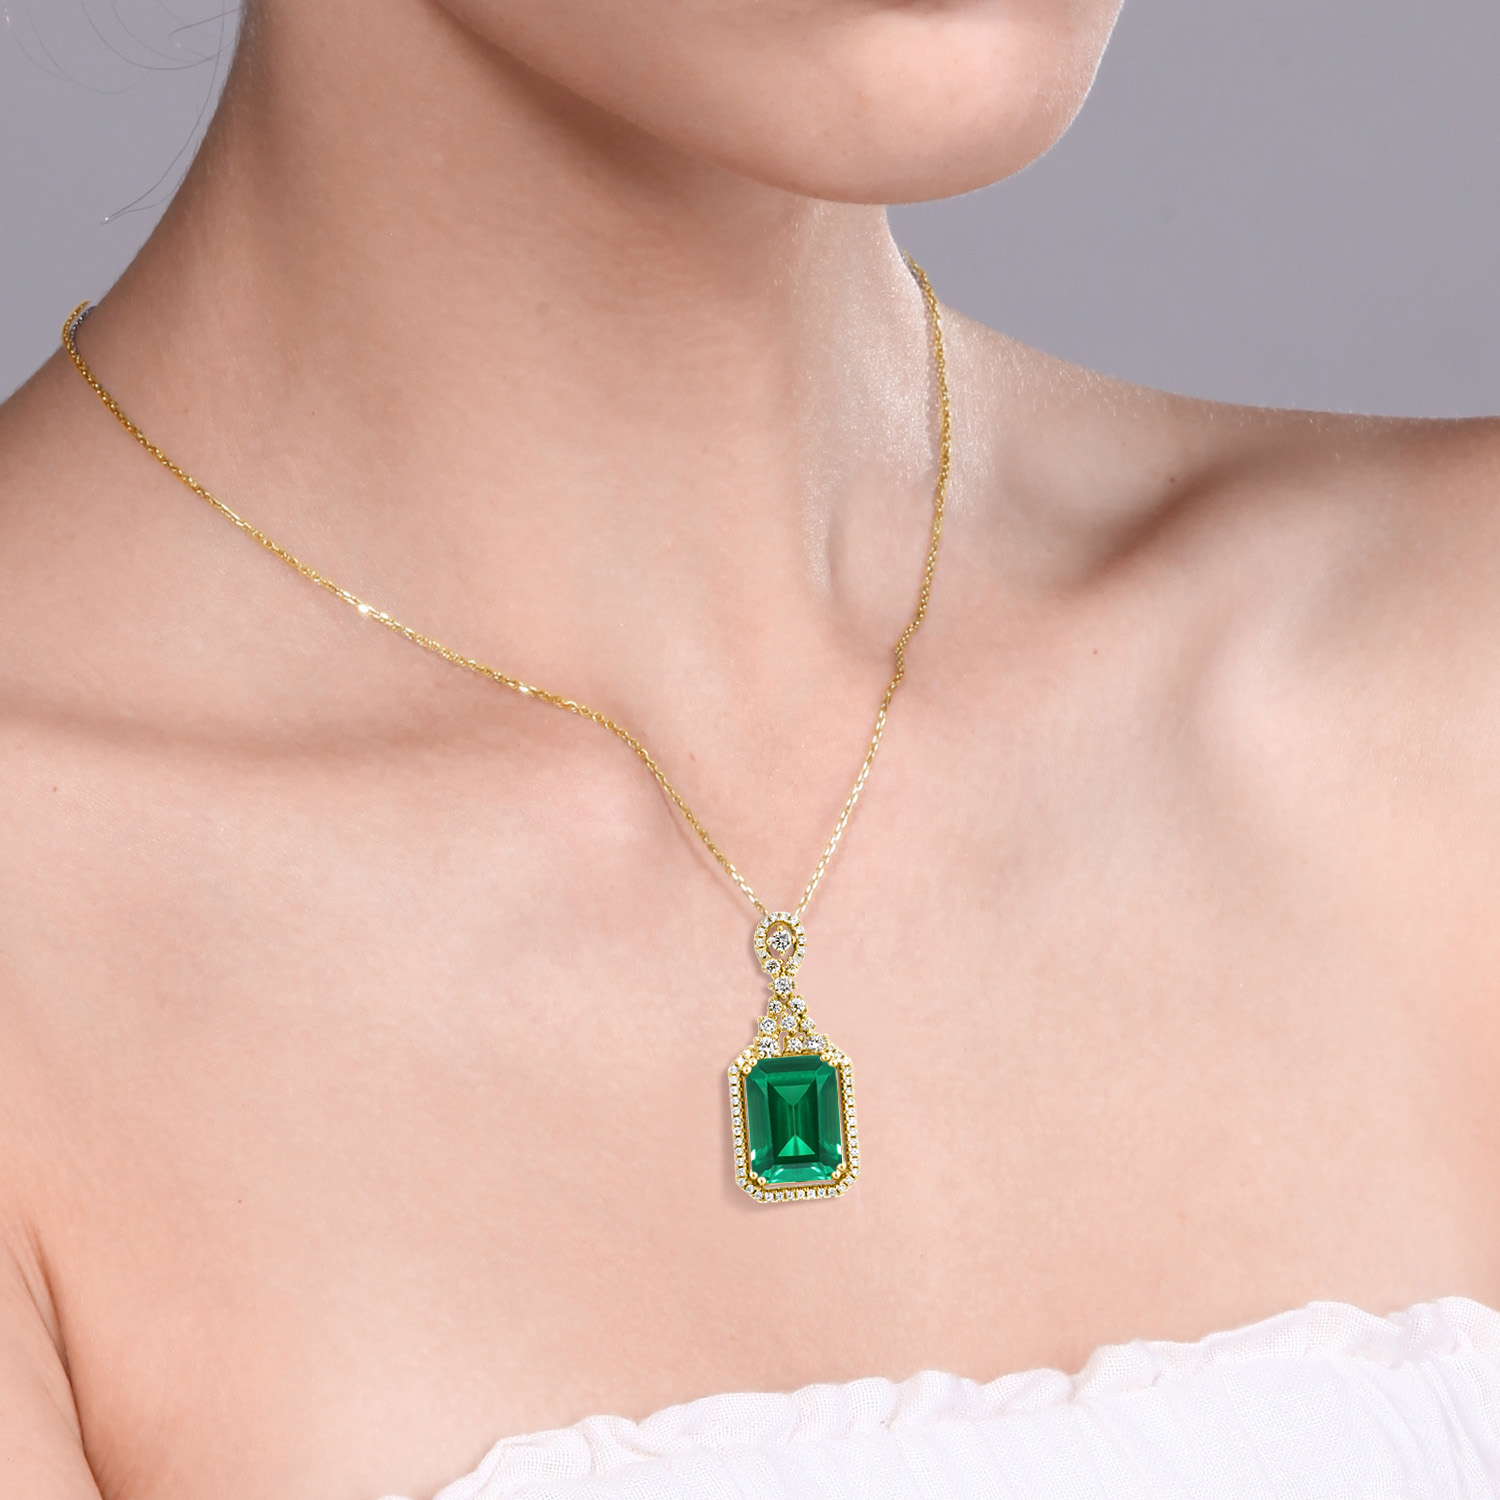 Gem Stone King 18K Yellow Gold Plated Silver Green Nano Emerald Pendant Necklace For Women (7.10 Cttw, Emerald Cut 14X10MM, with 18 Inch Chain)